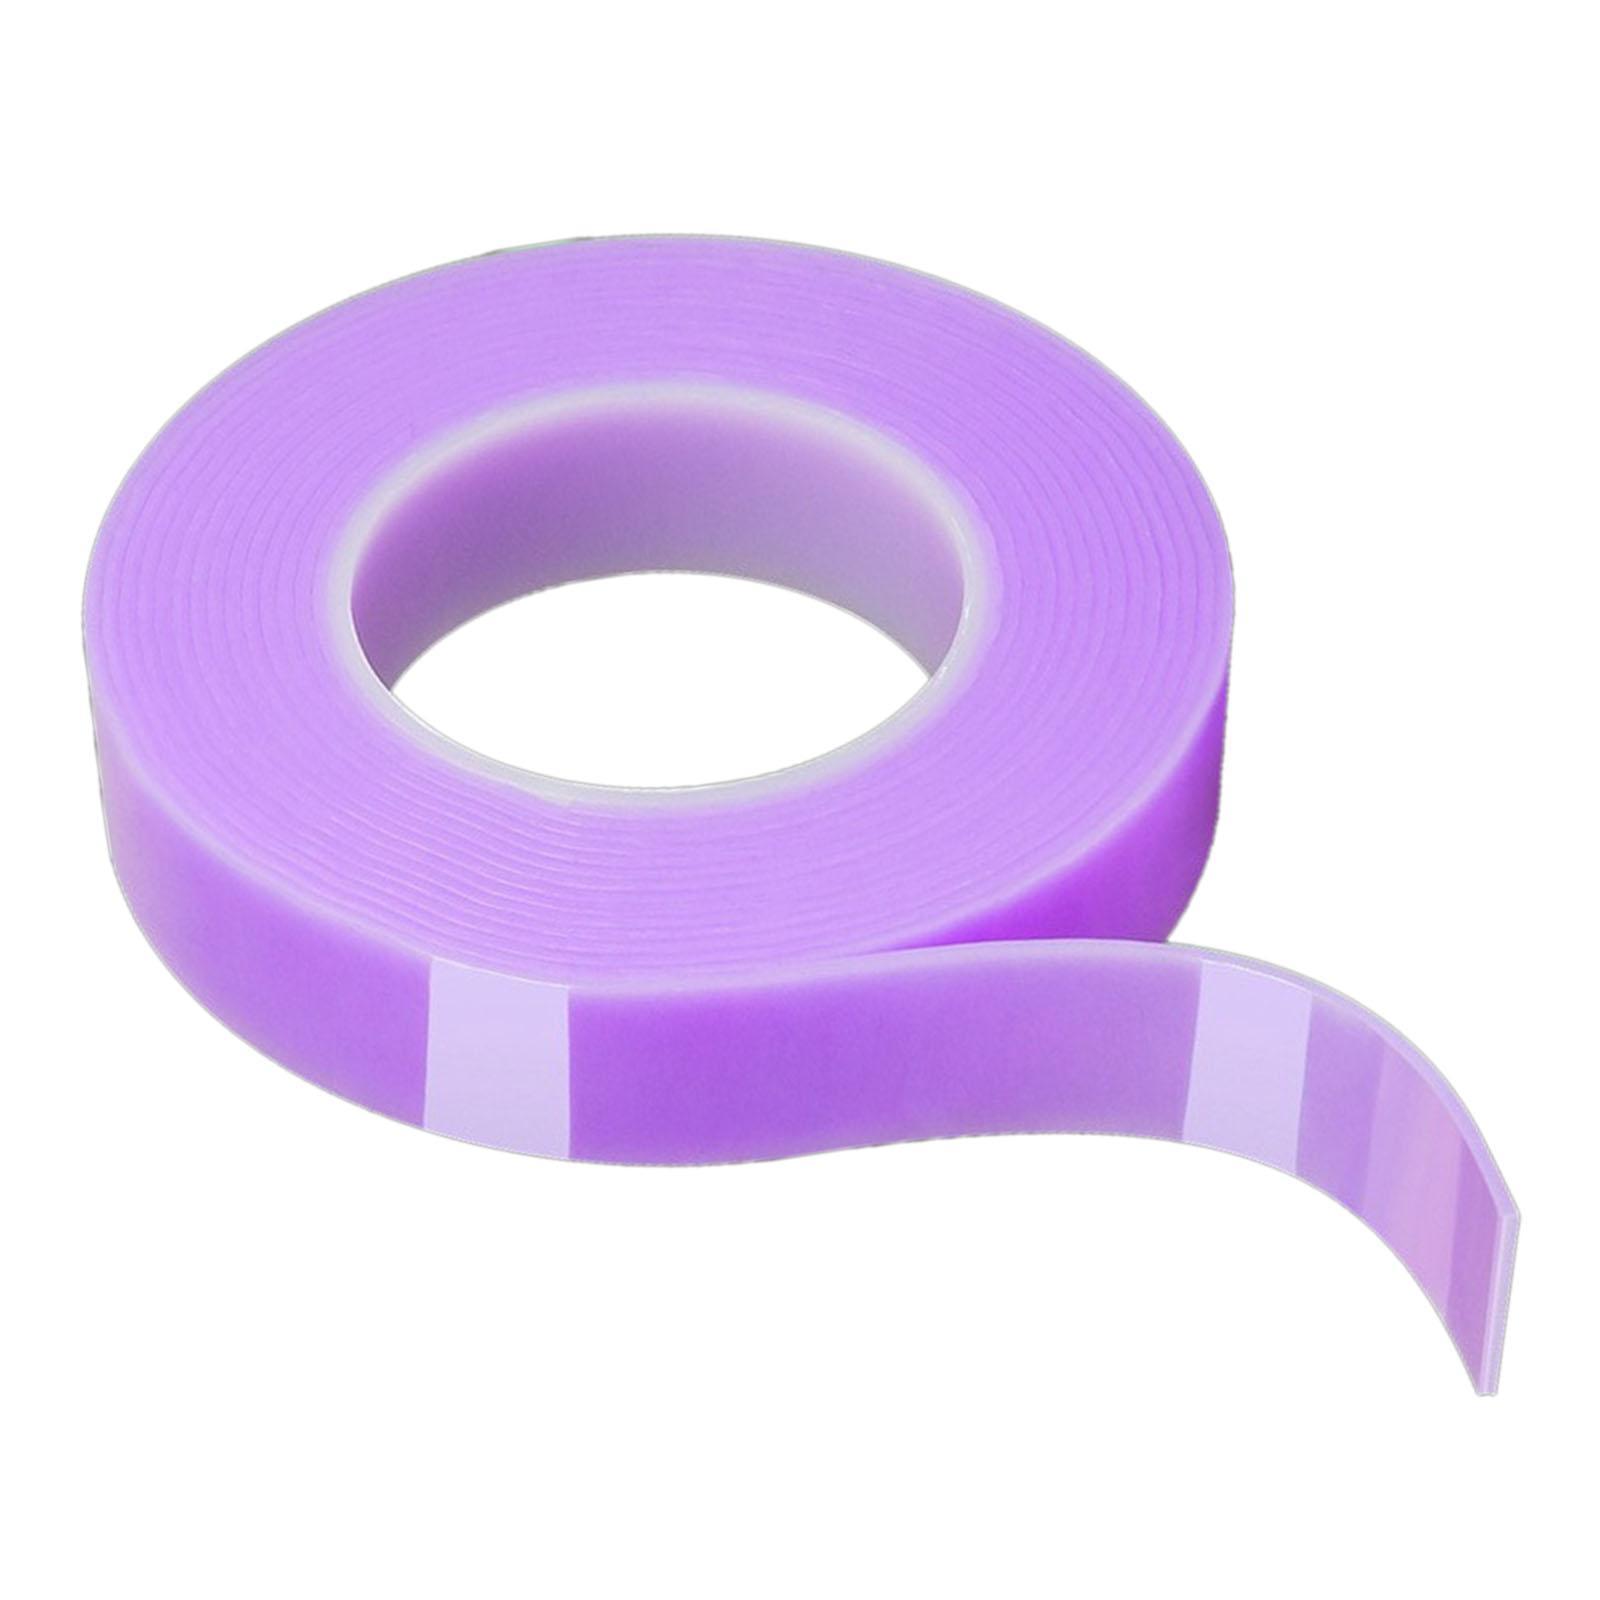 Bubble Blowing Double Sided Tape Reusable Non Marking Tape for Classroom DIY Craft